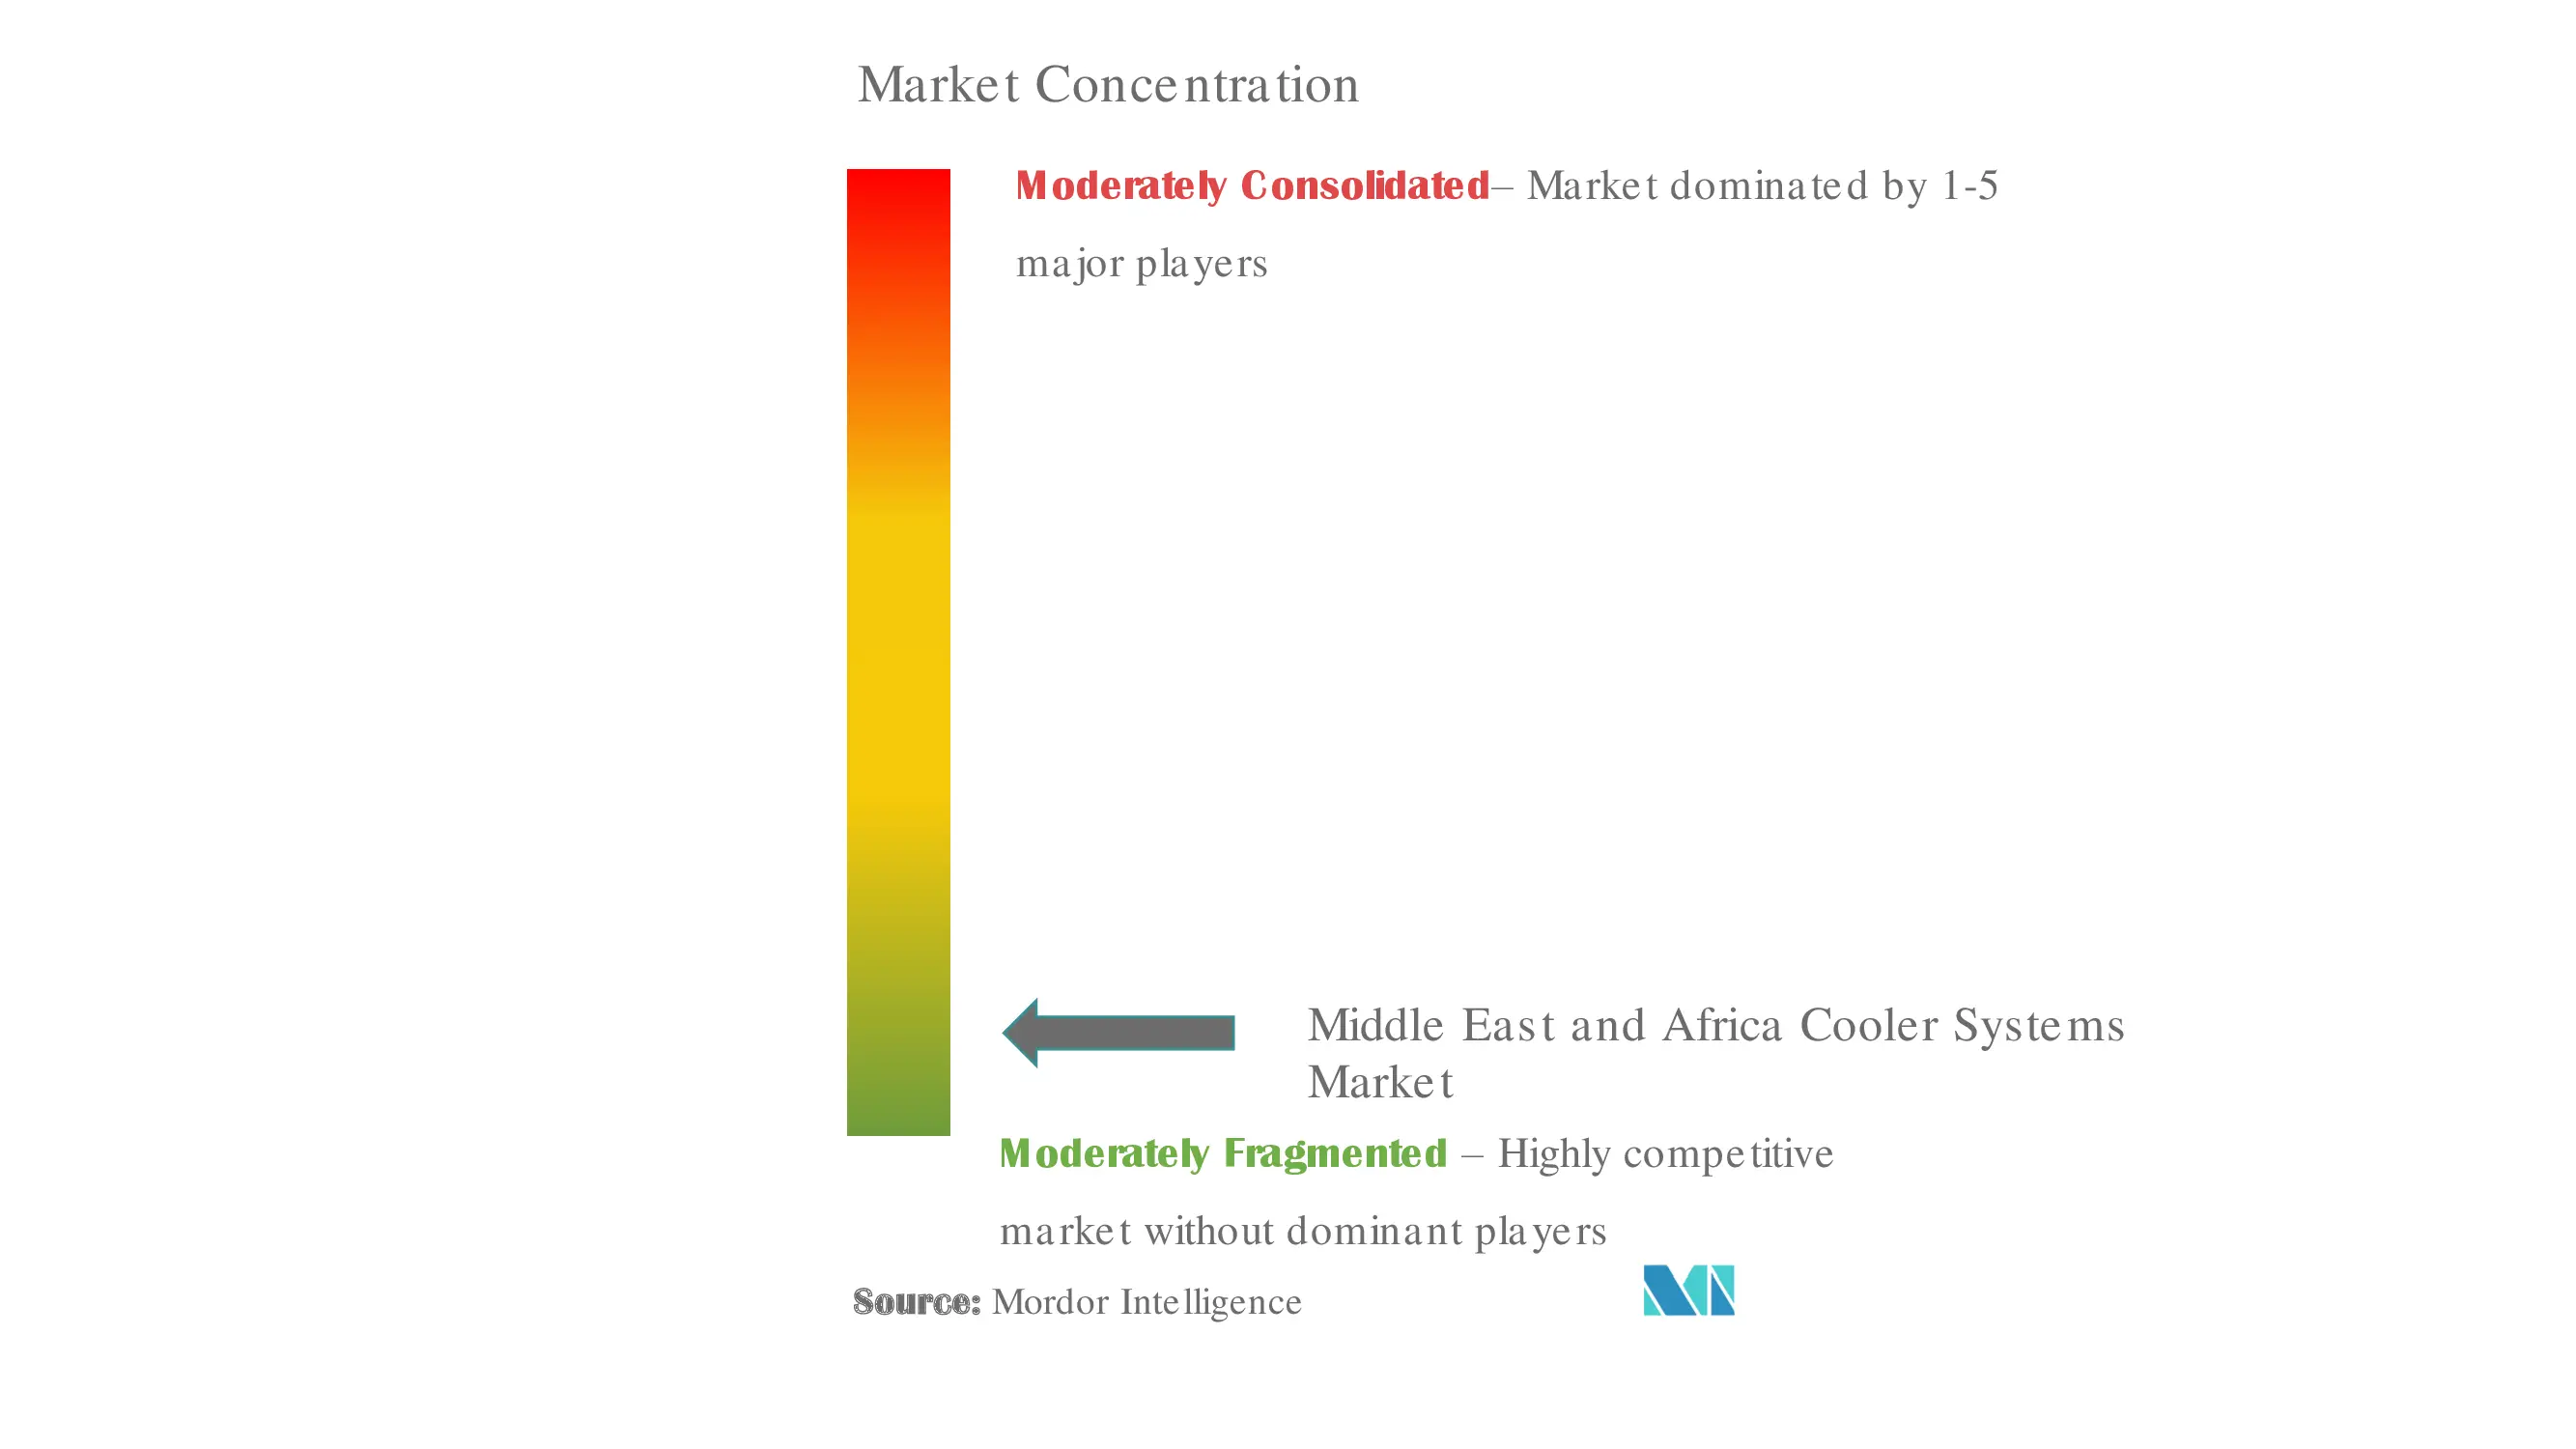 Middle East and Africa Cooling Systems Market Concentration